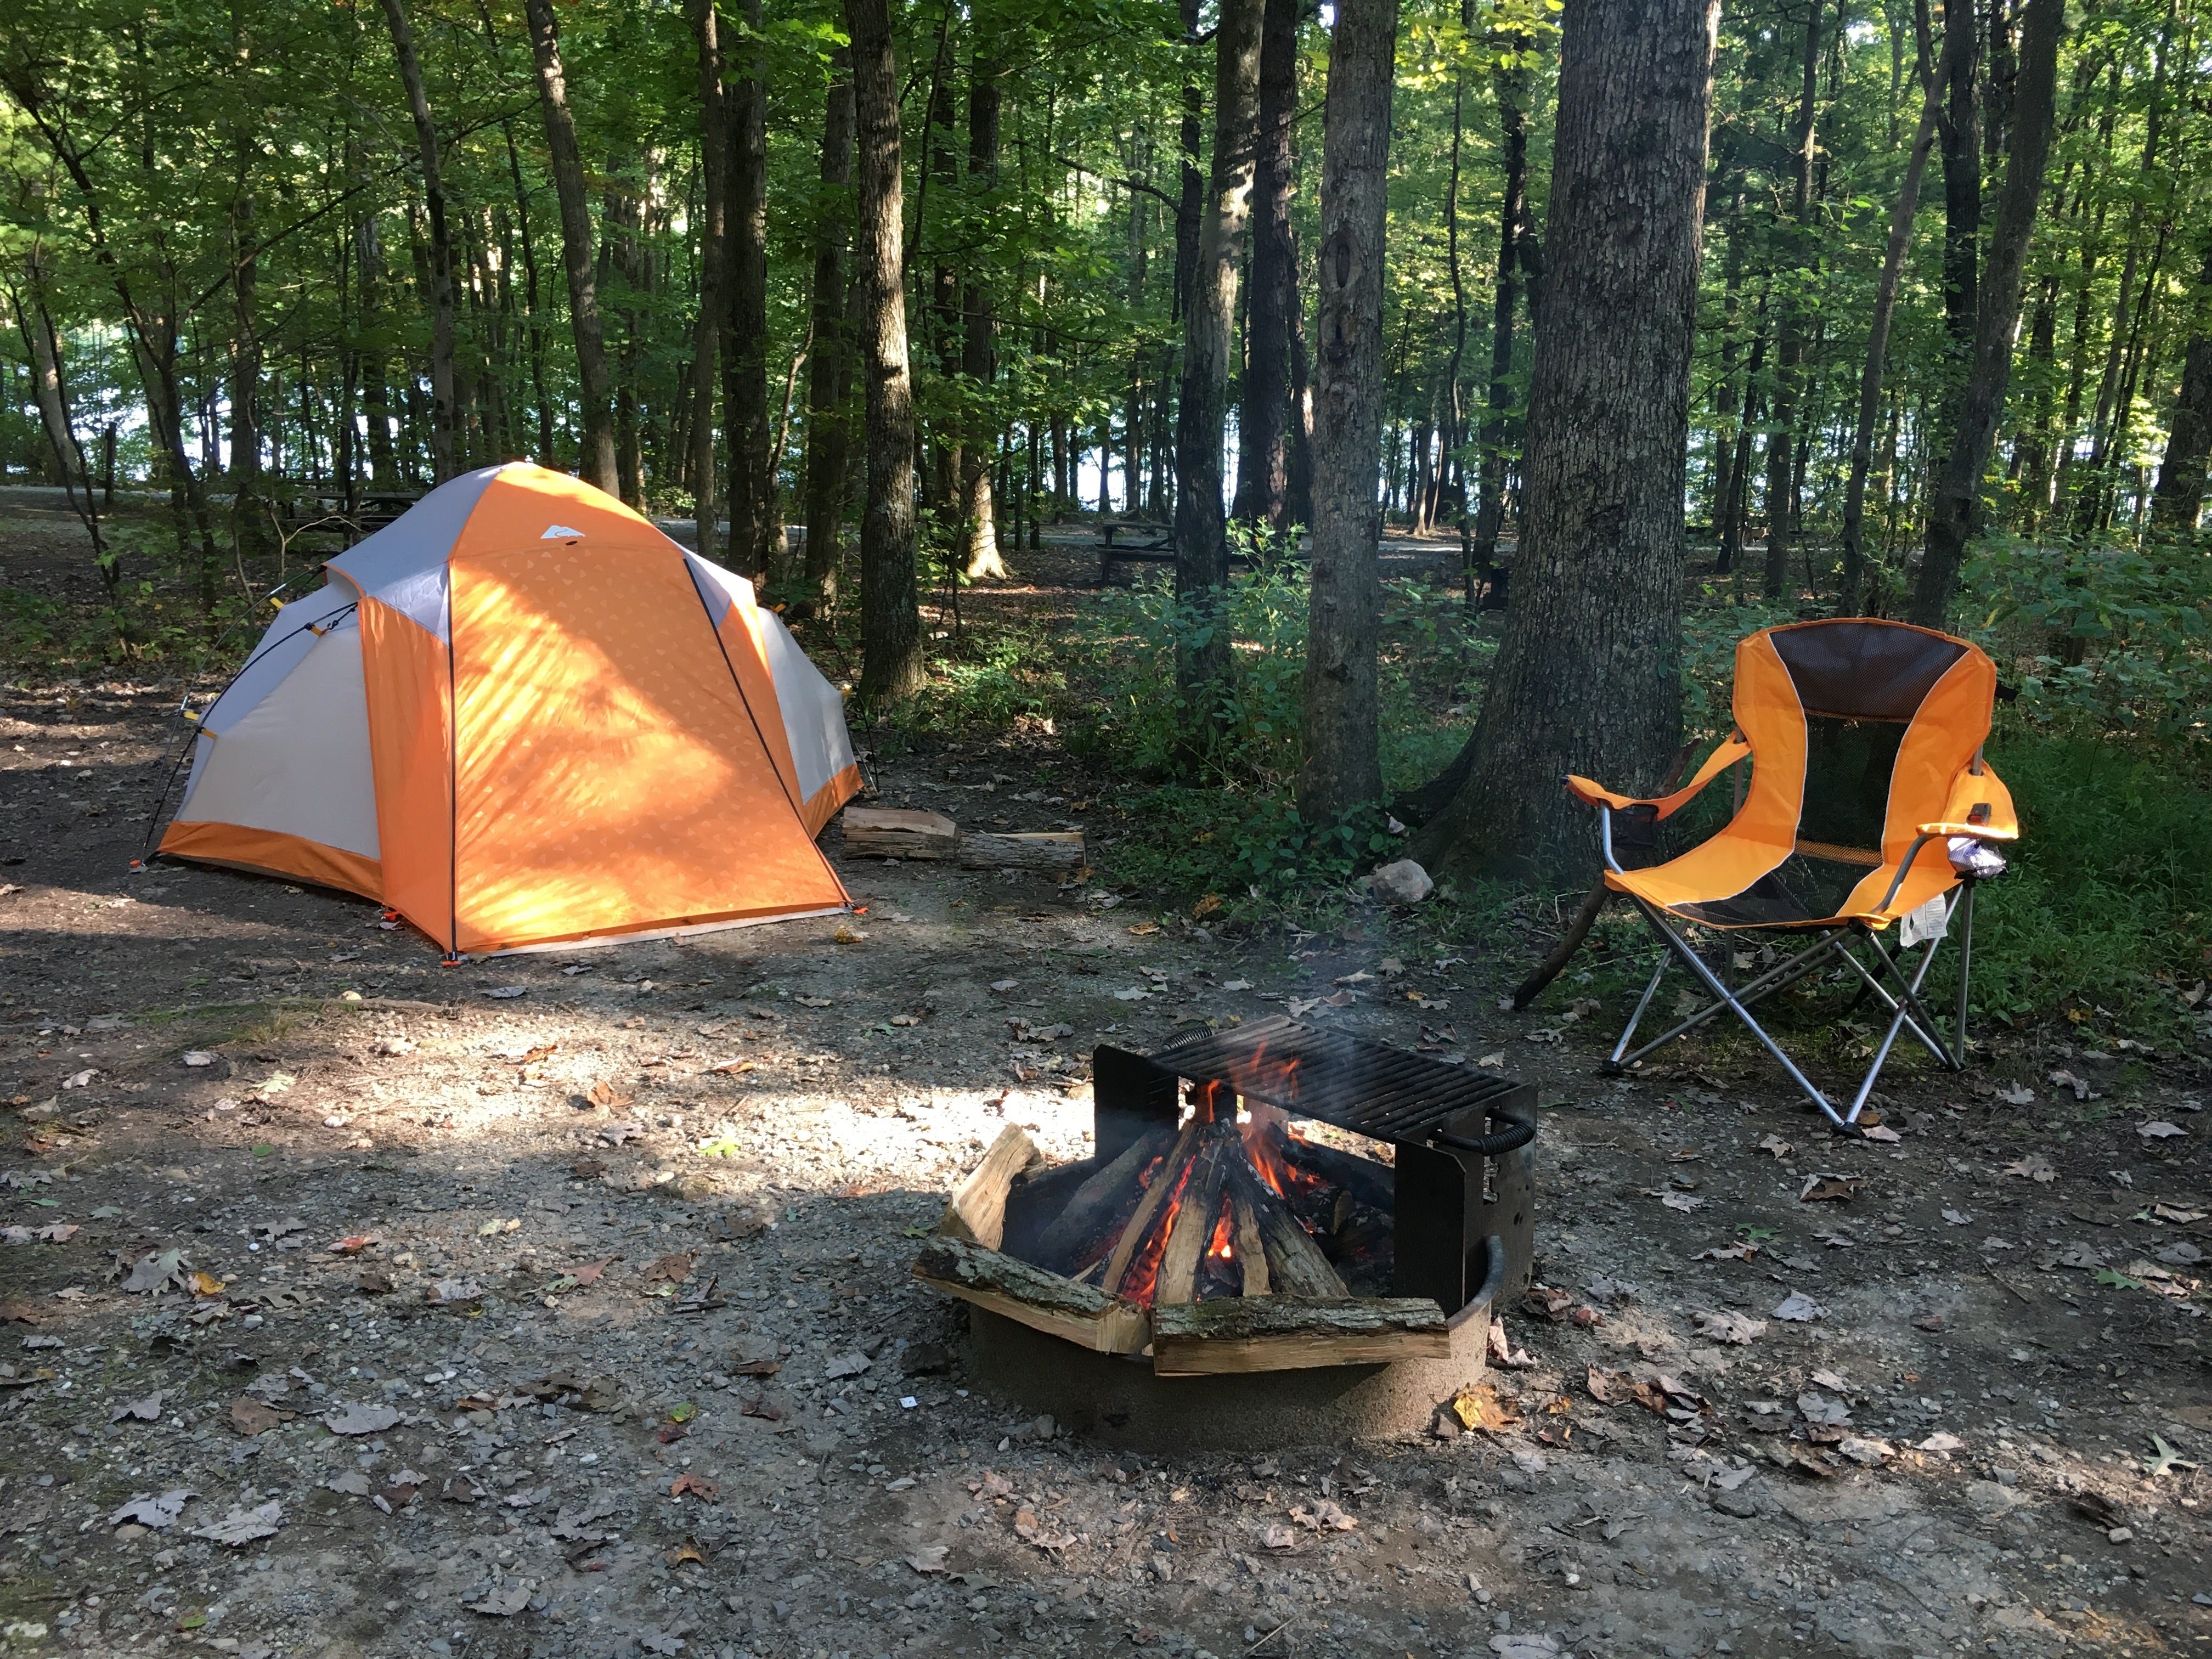 Camper submitted image from Mauch Chunk Lake Park - 5